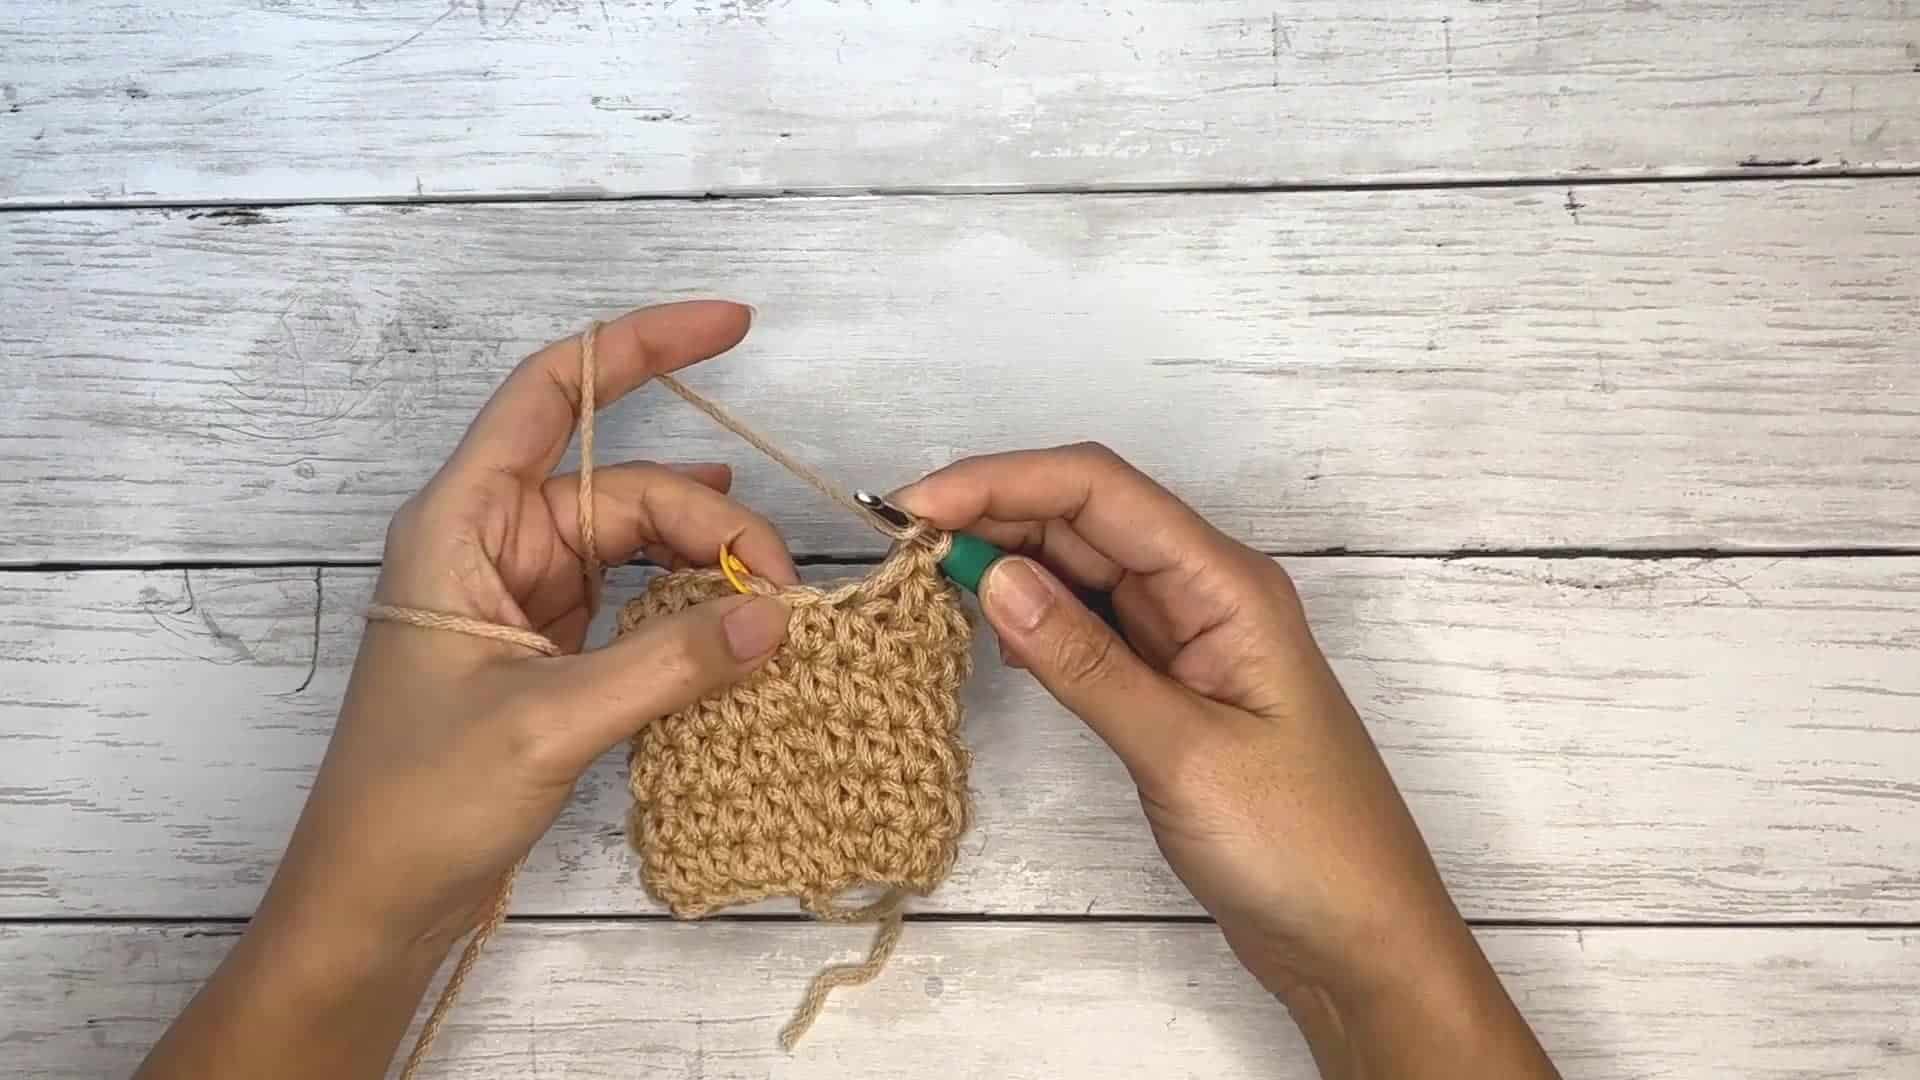 how to crochet in the round seamlessly - frame at 1m0s